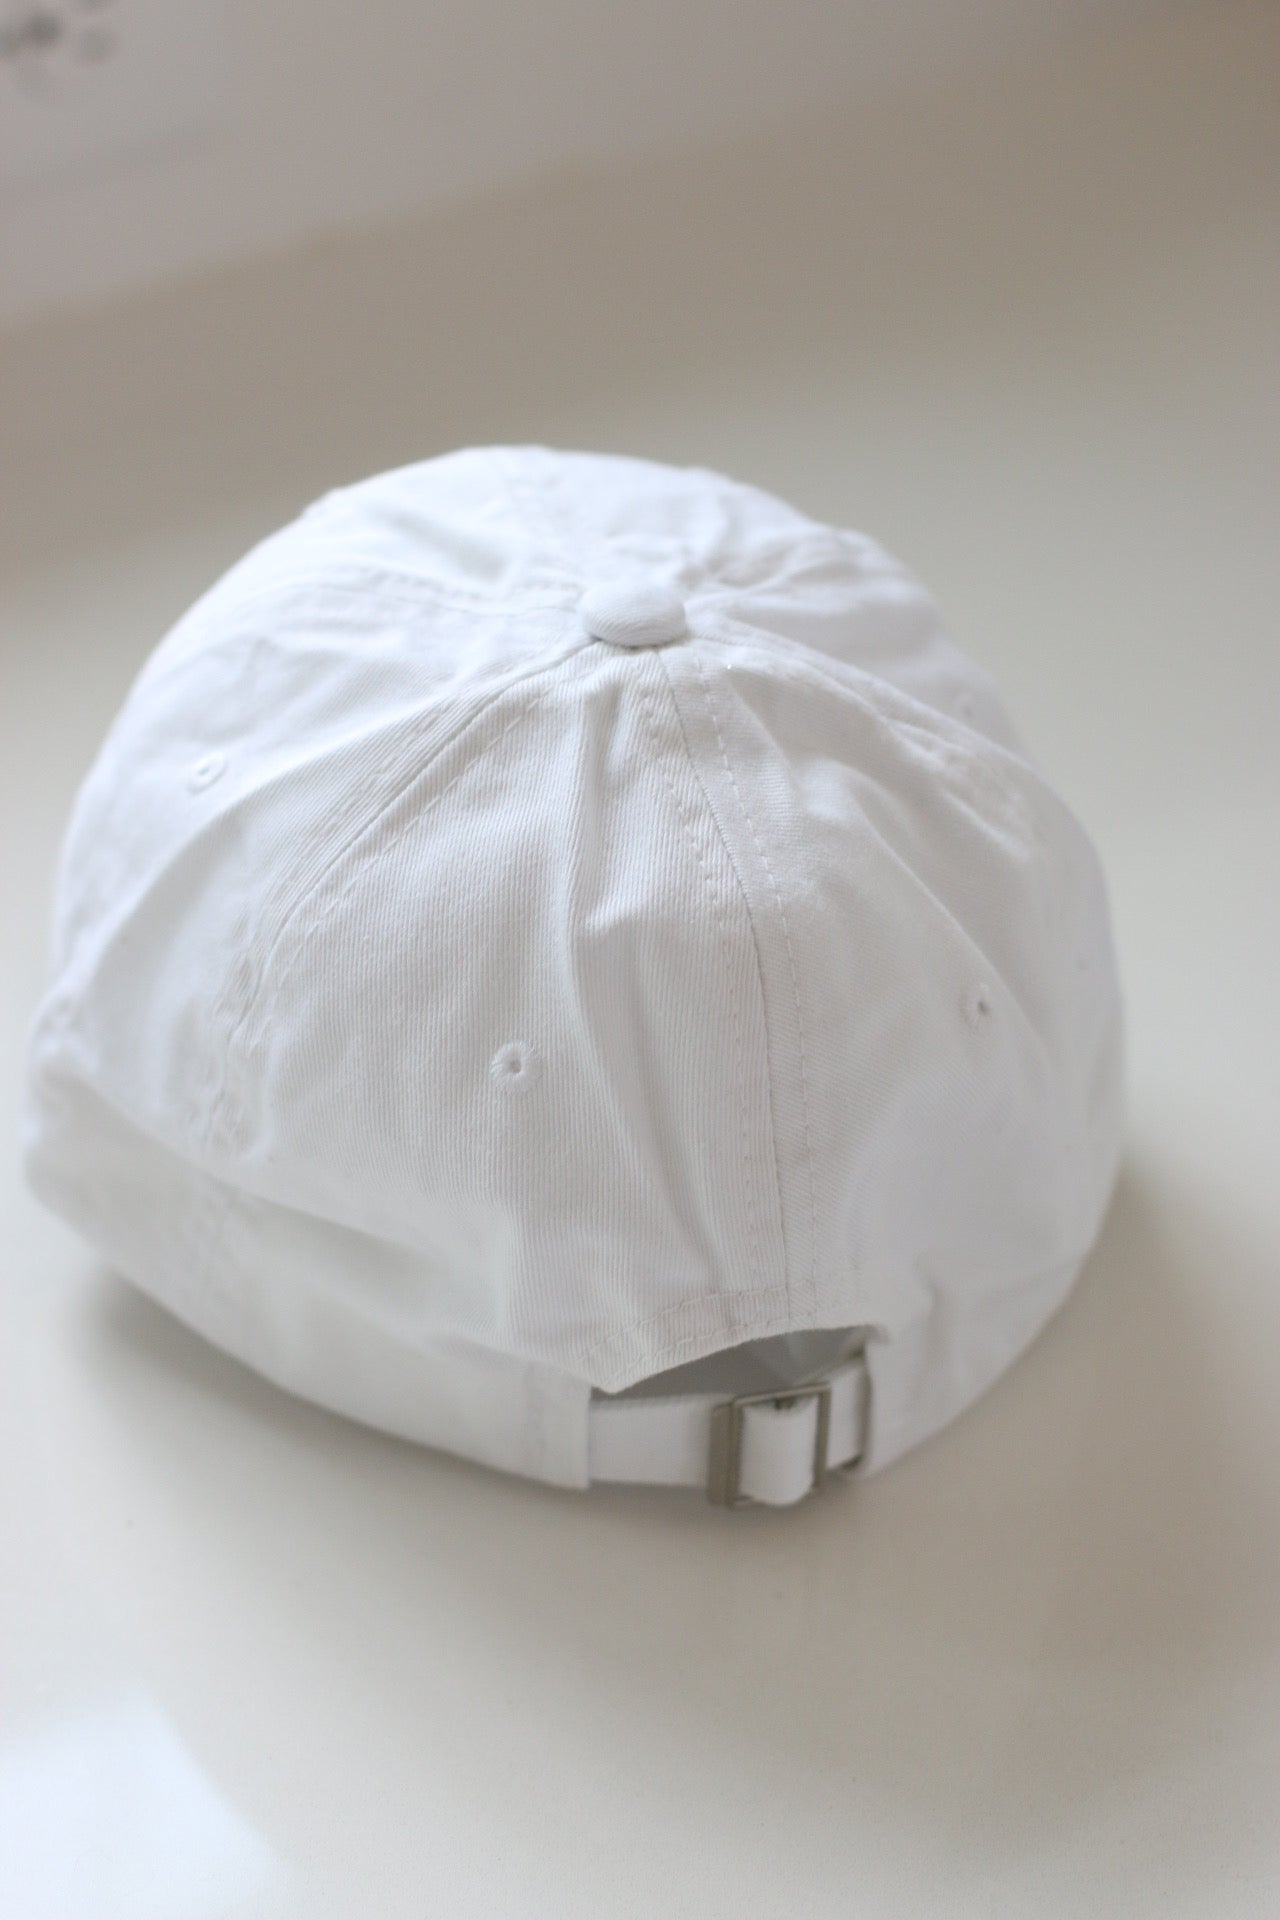 Back of baseball cap, showing adjustable feature.